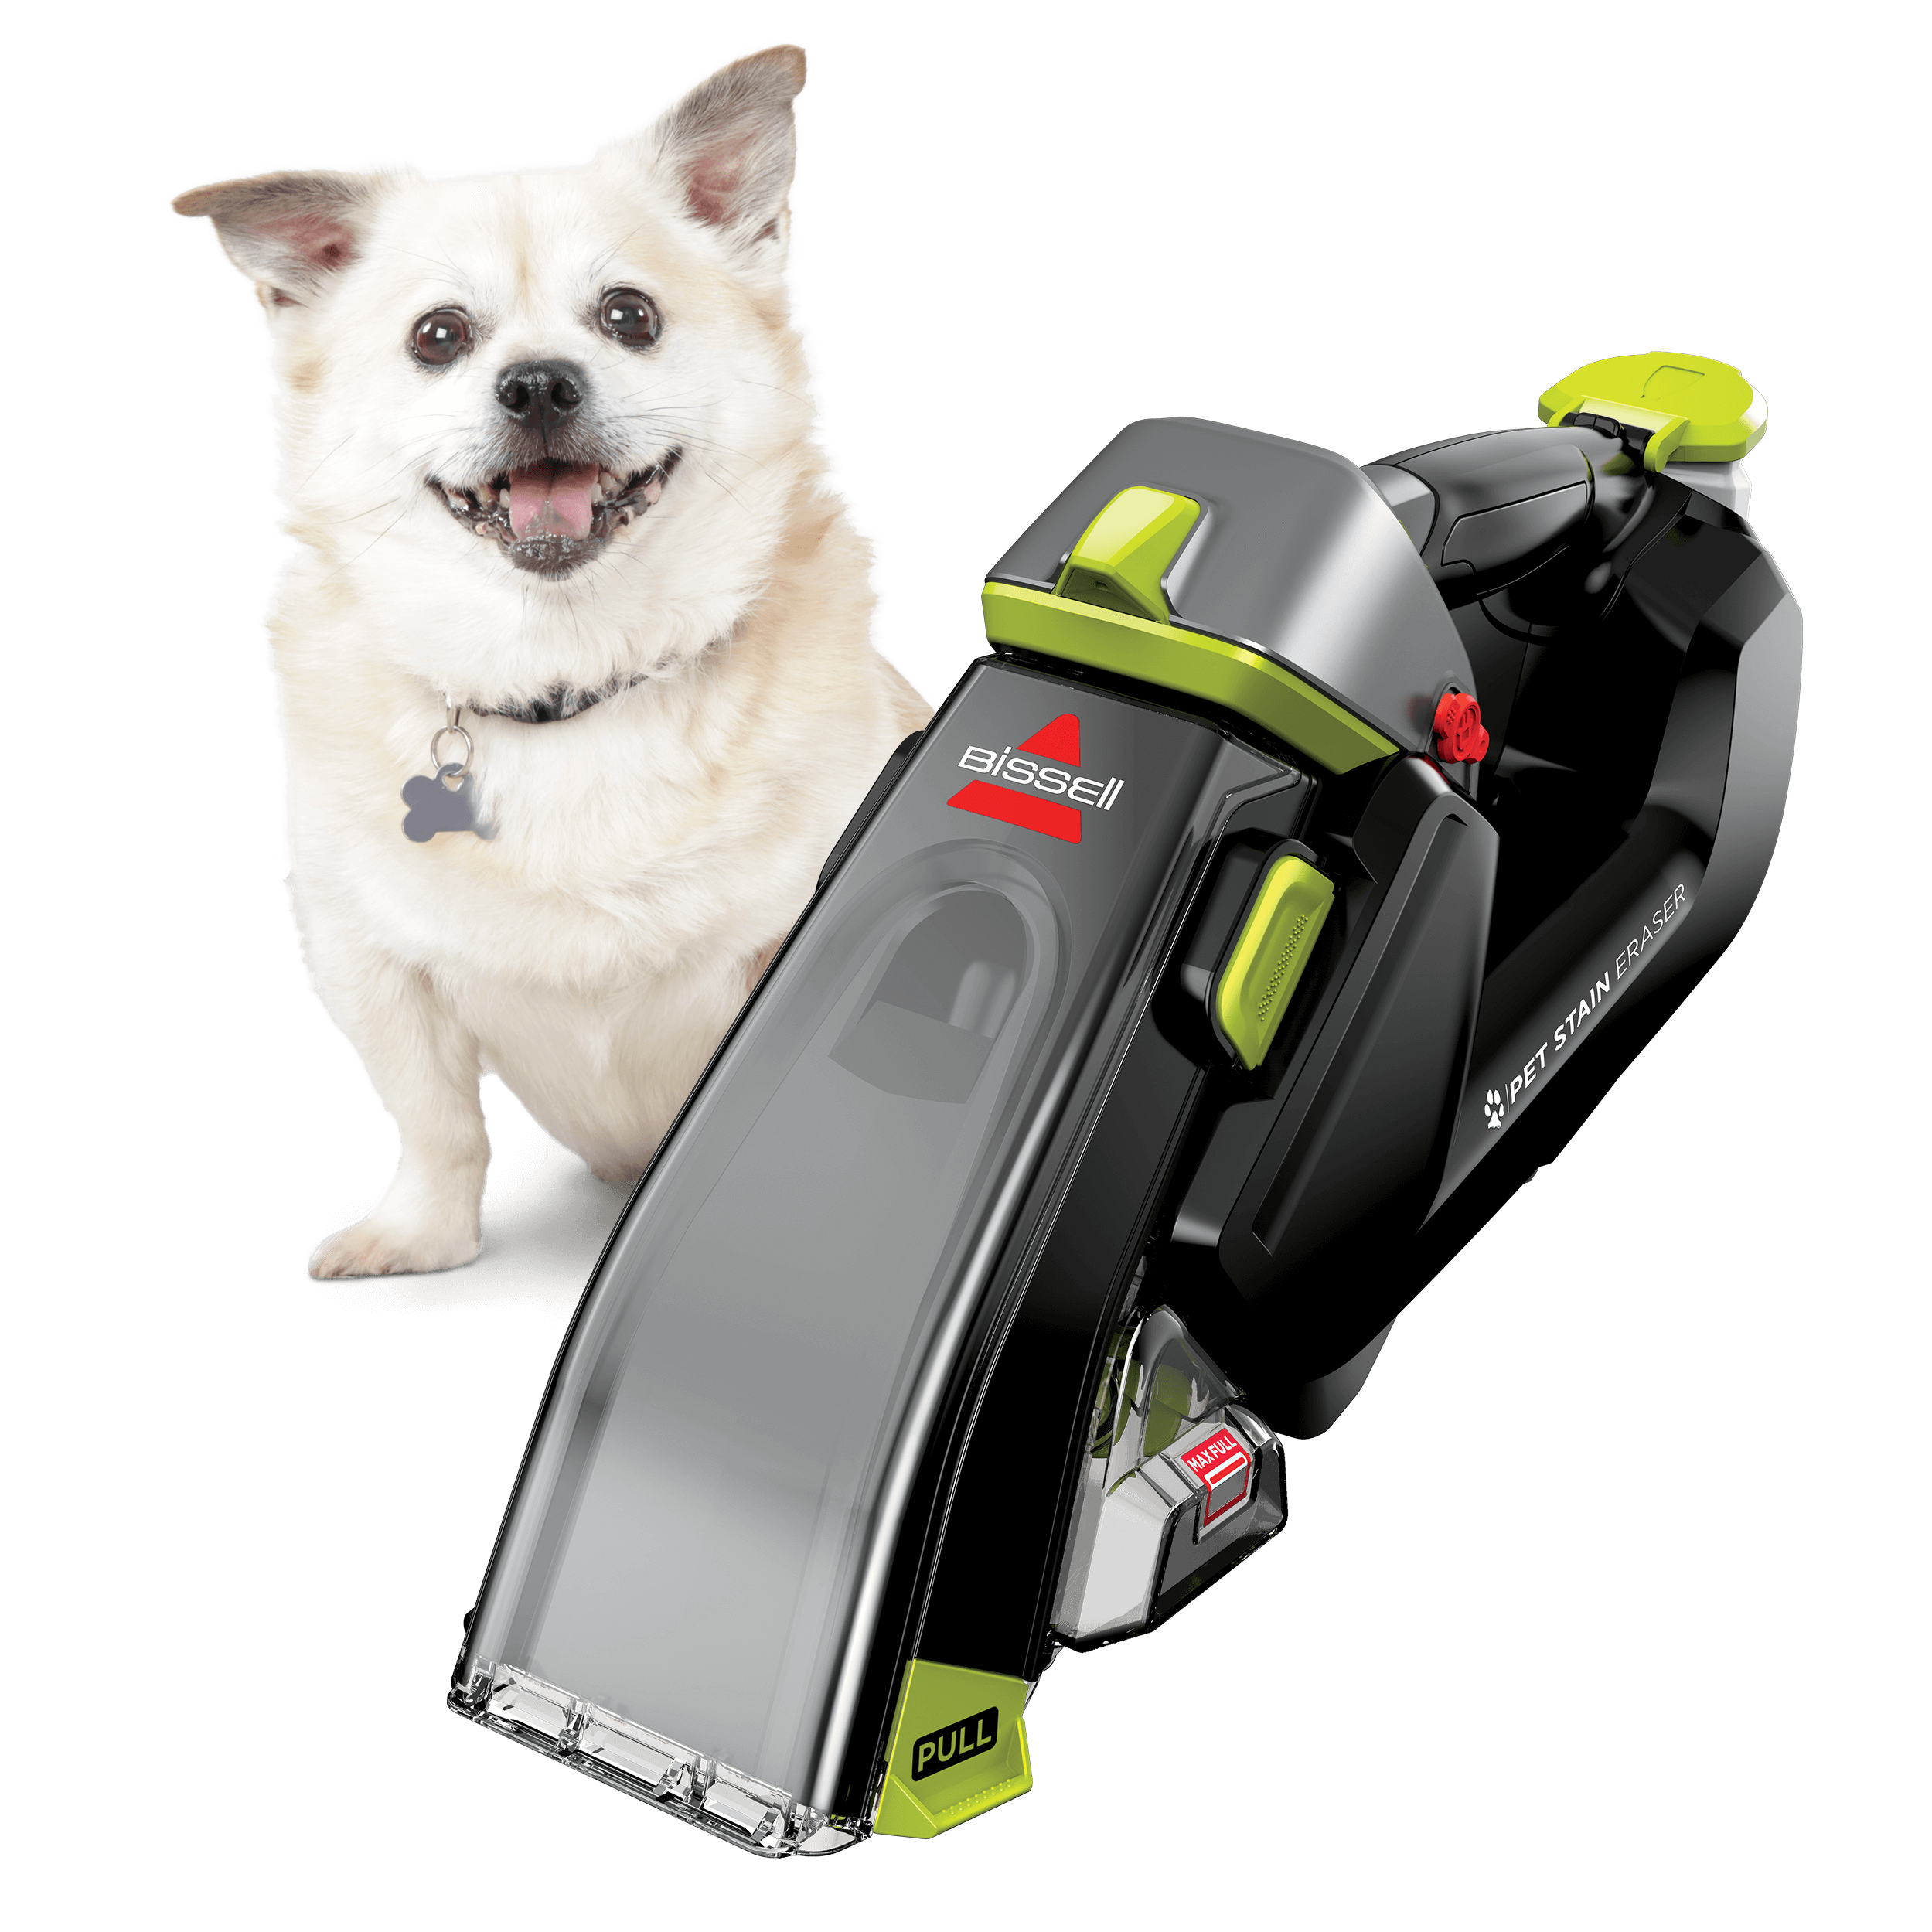 Pet Stain Eraser™ Plus 3182 | BISSELL® Portable Spot Cleaner